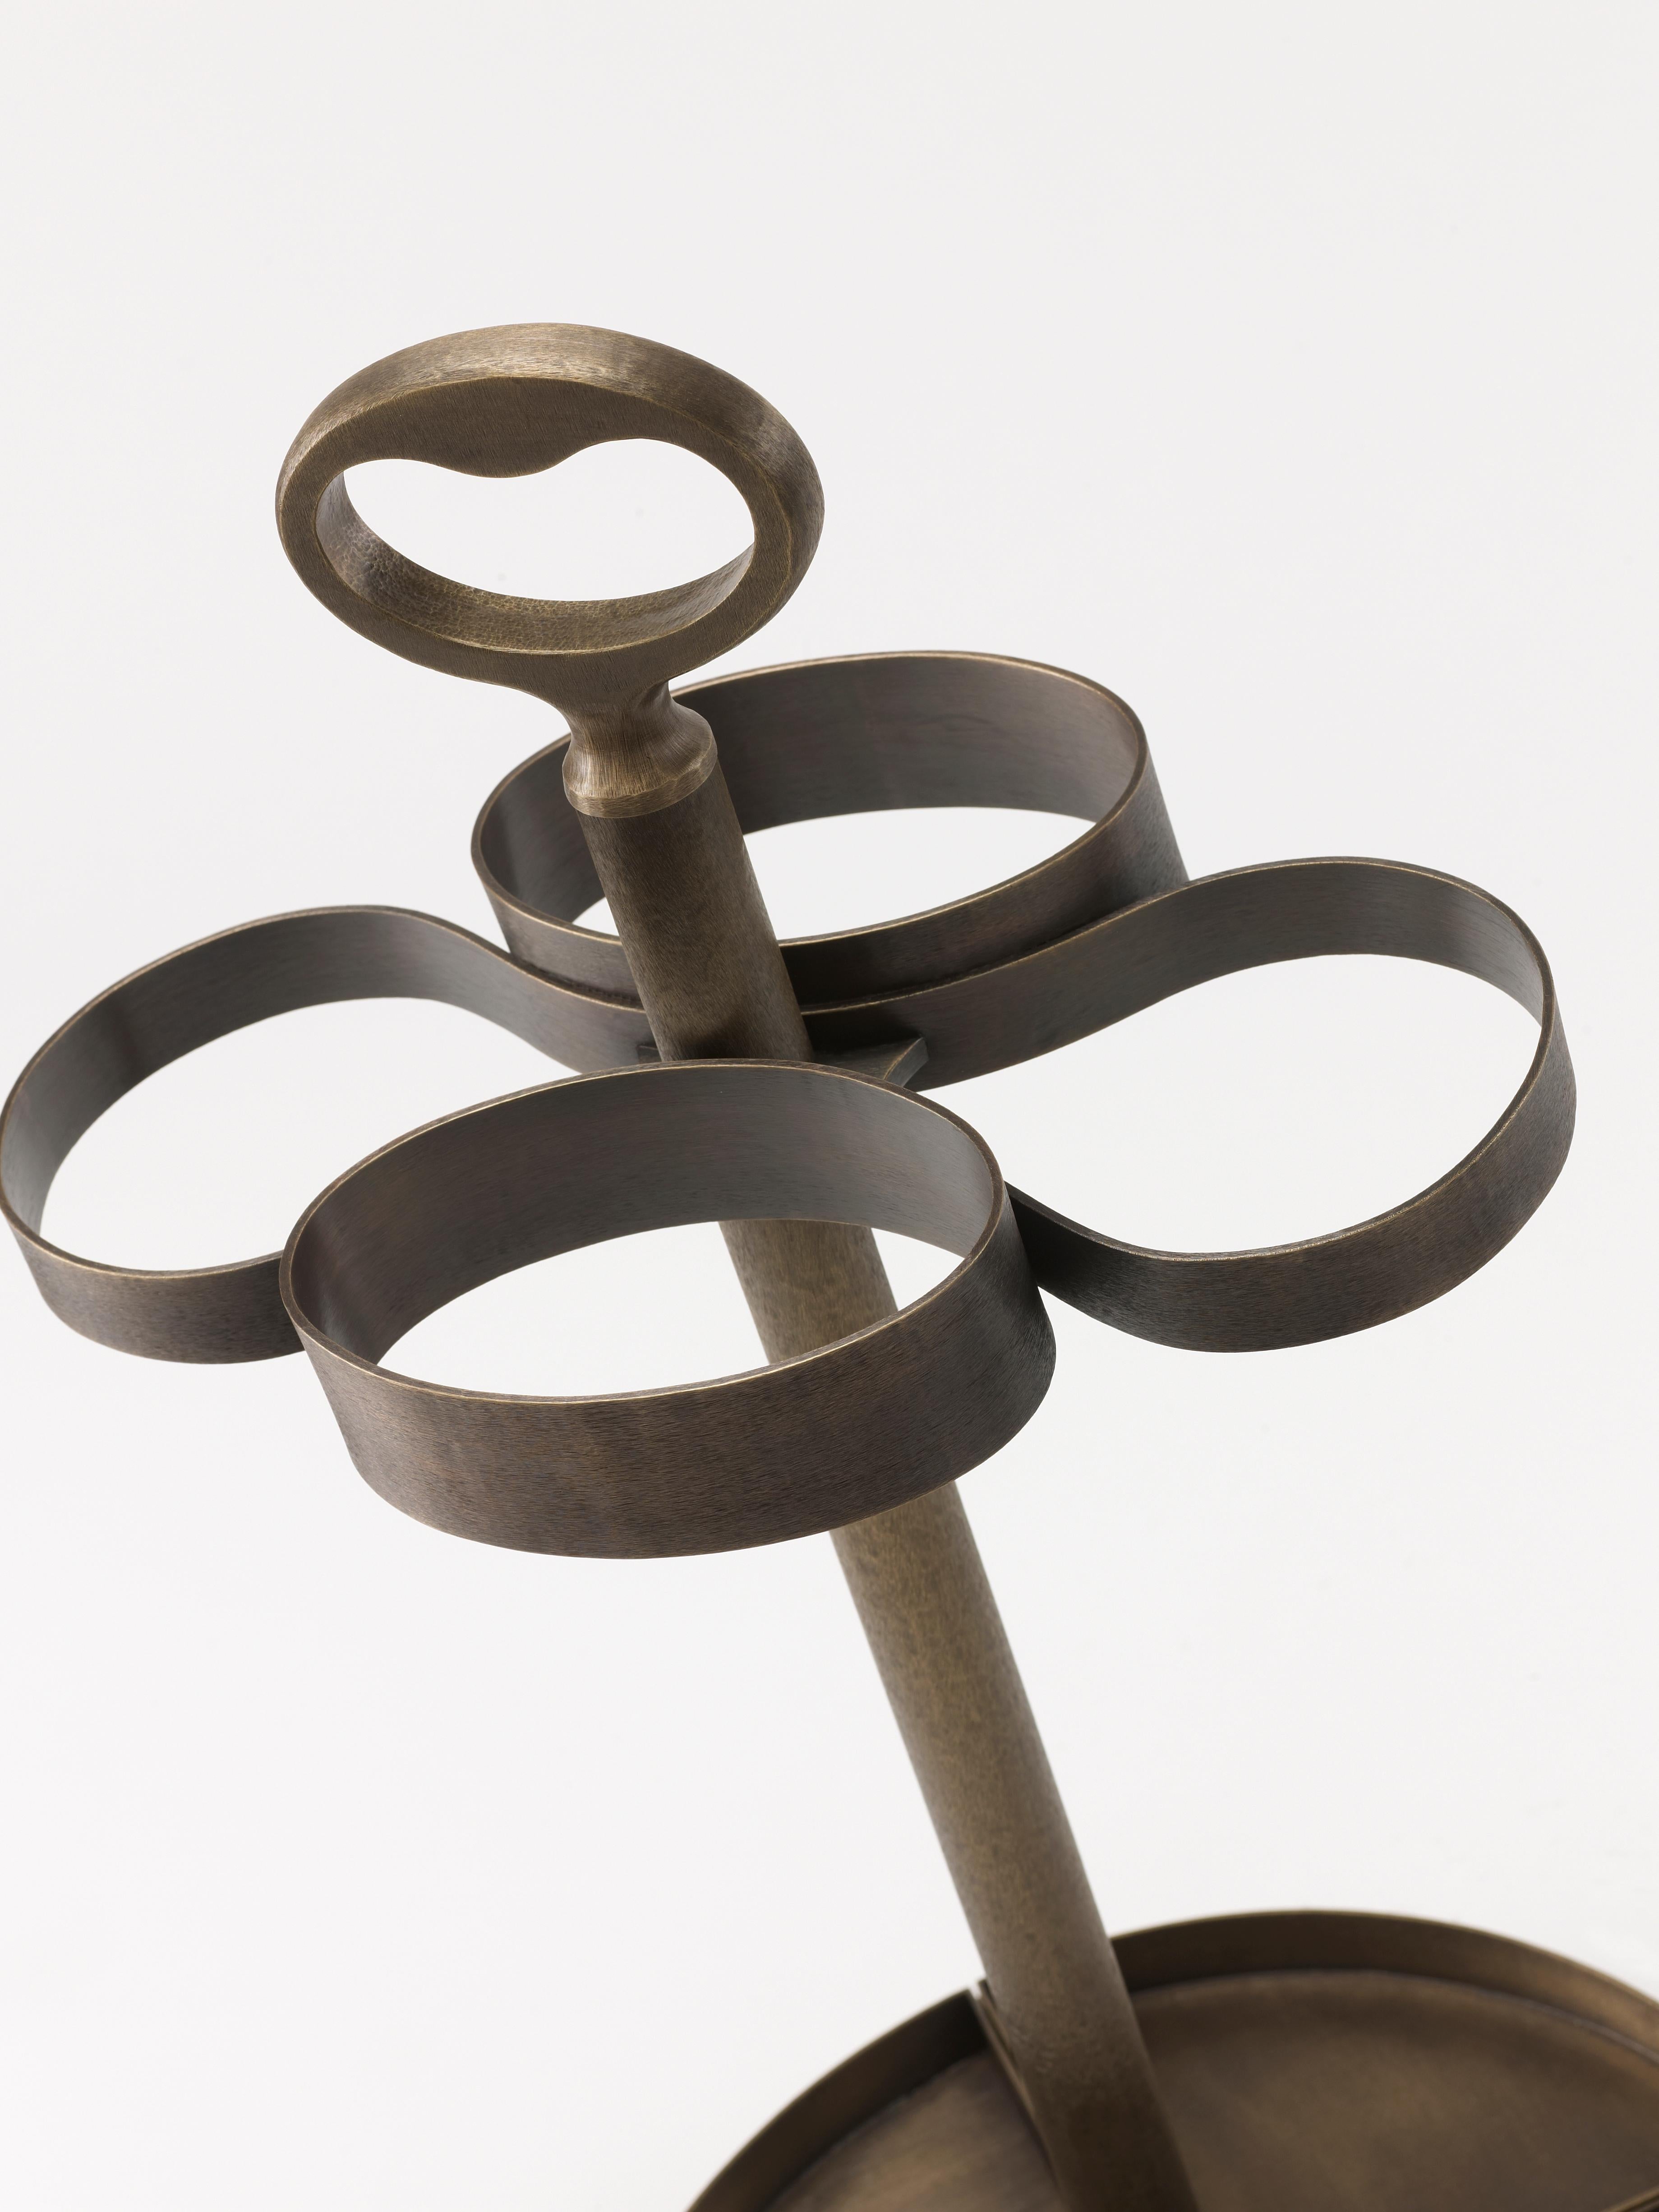 Fred is a hammered bronze umbrella stand with soft shapes and Classic flavour, inspired by the shapes of nature.
            